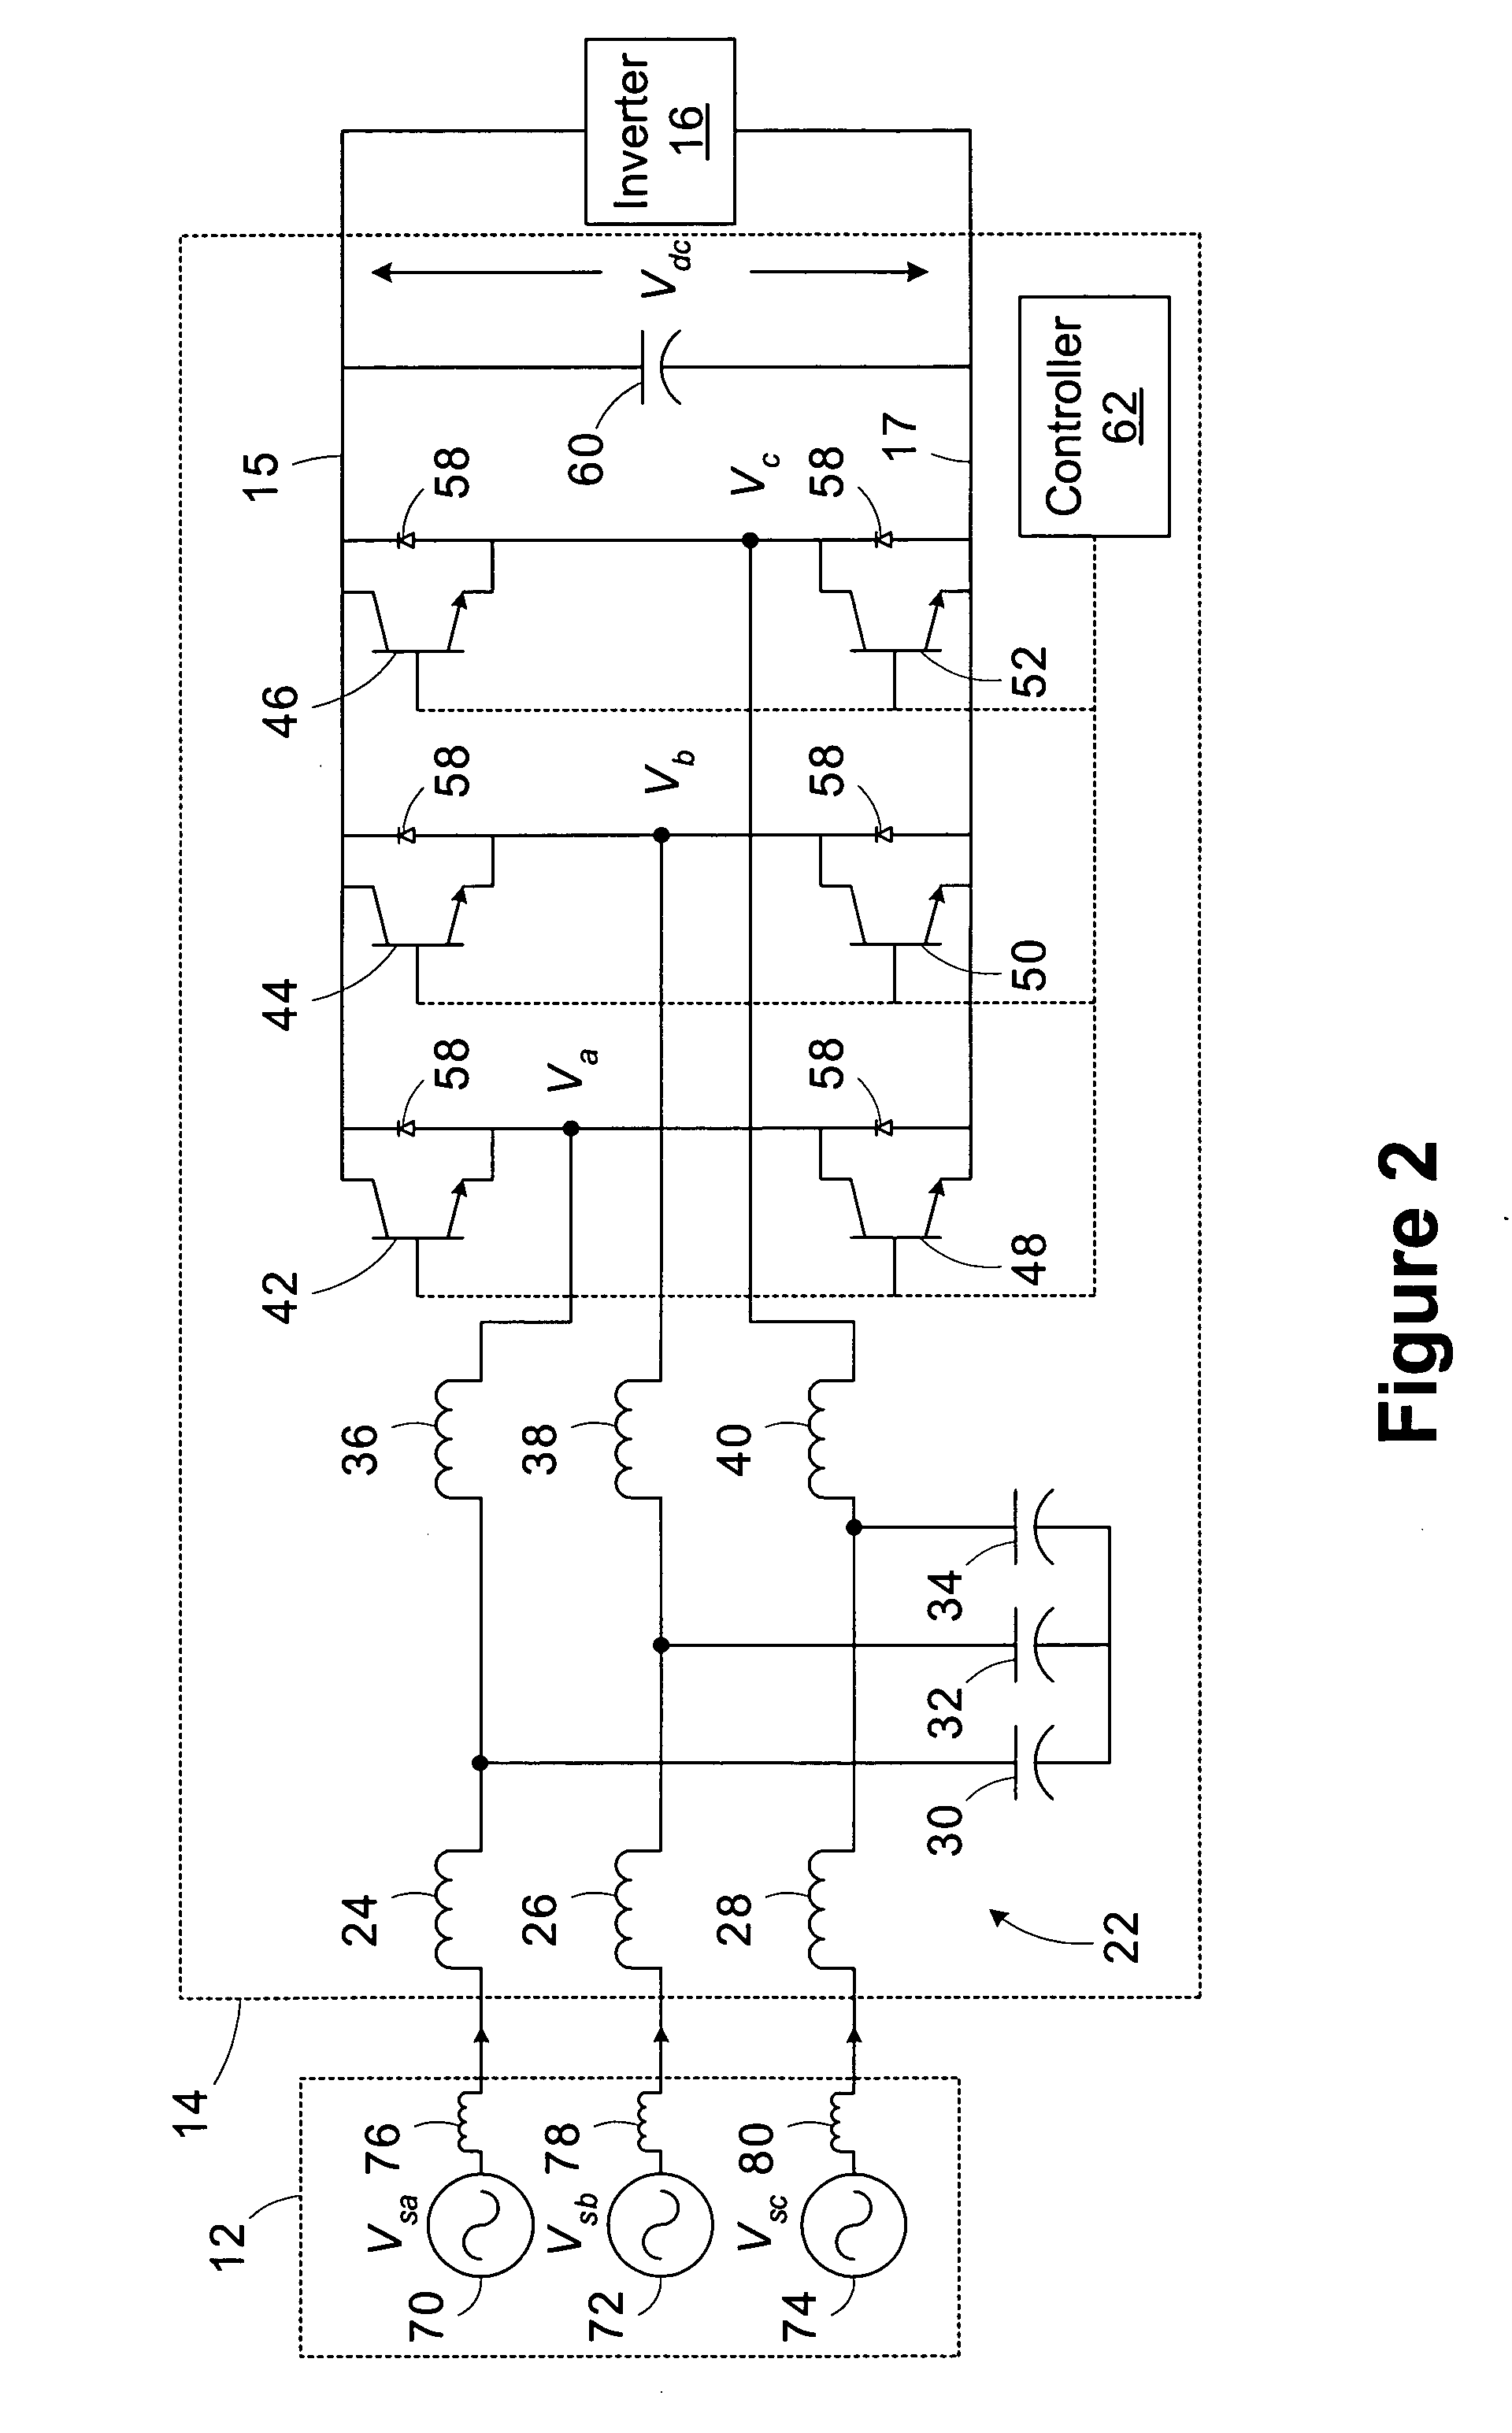 Pulse width modulation (PWM) rectifier with variable switching frequency